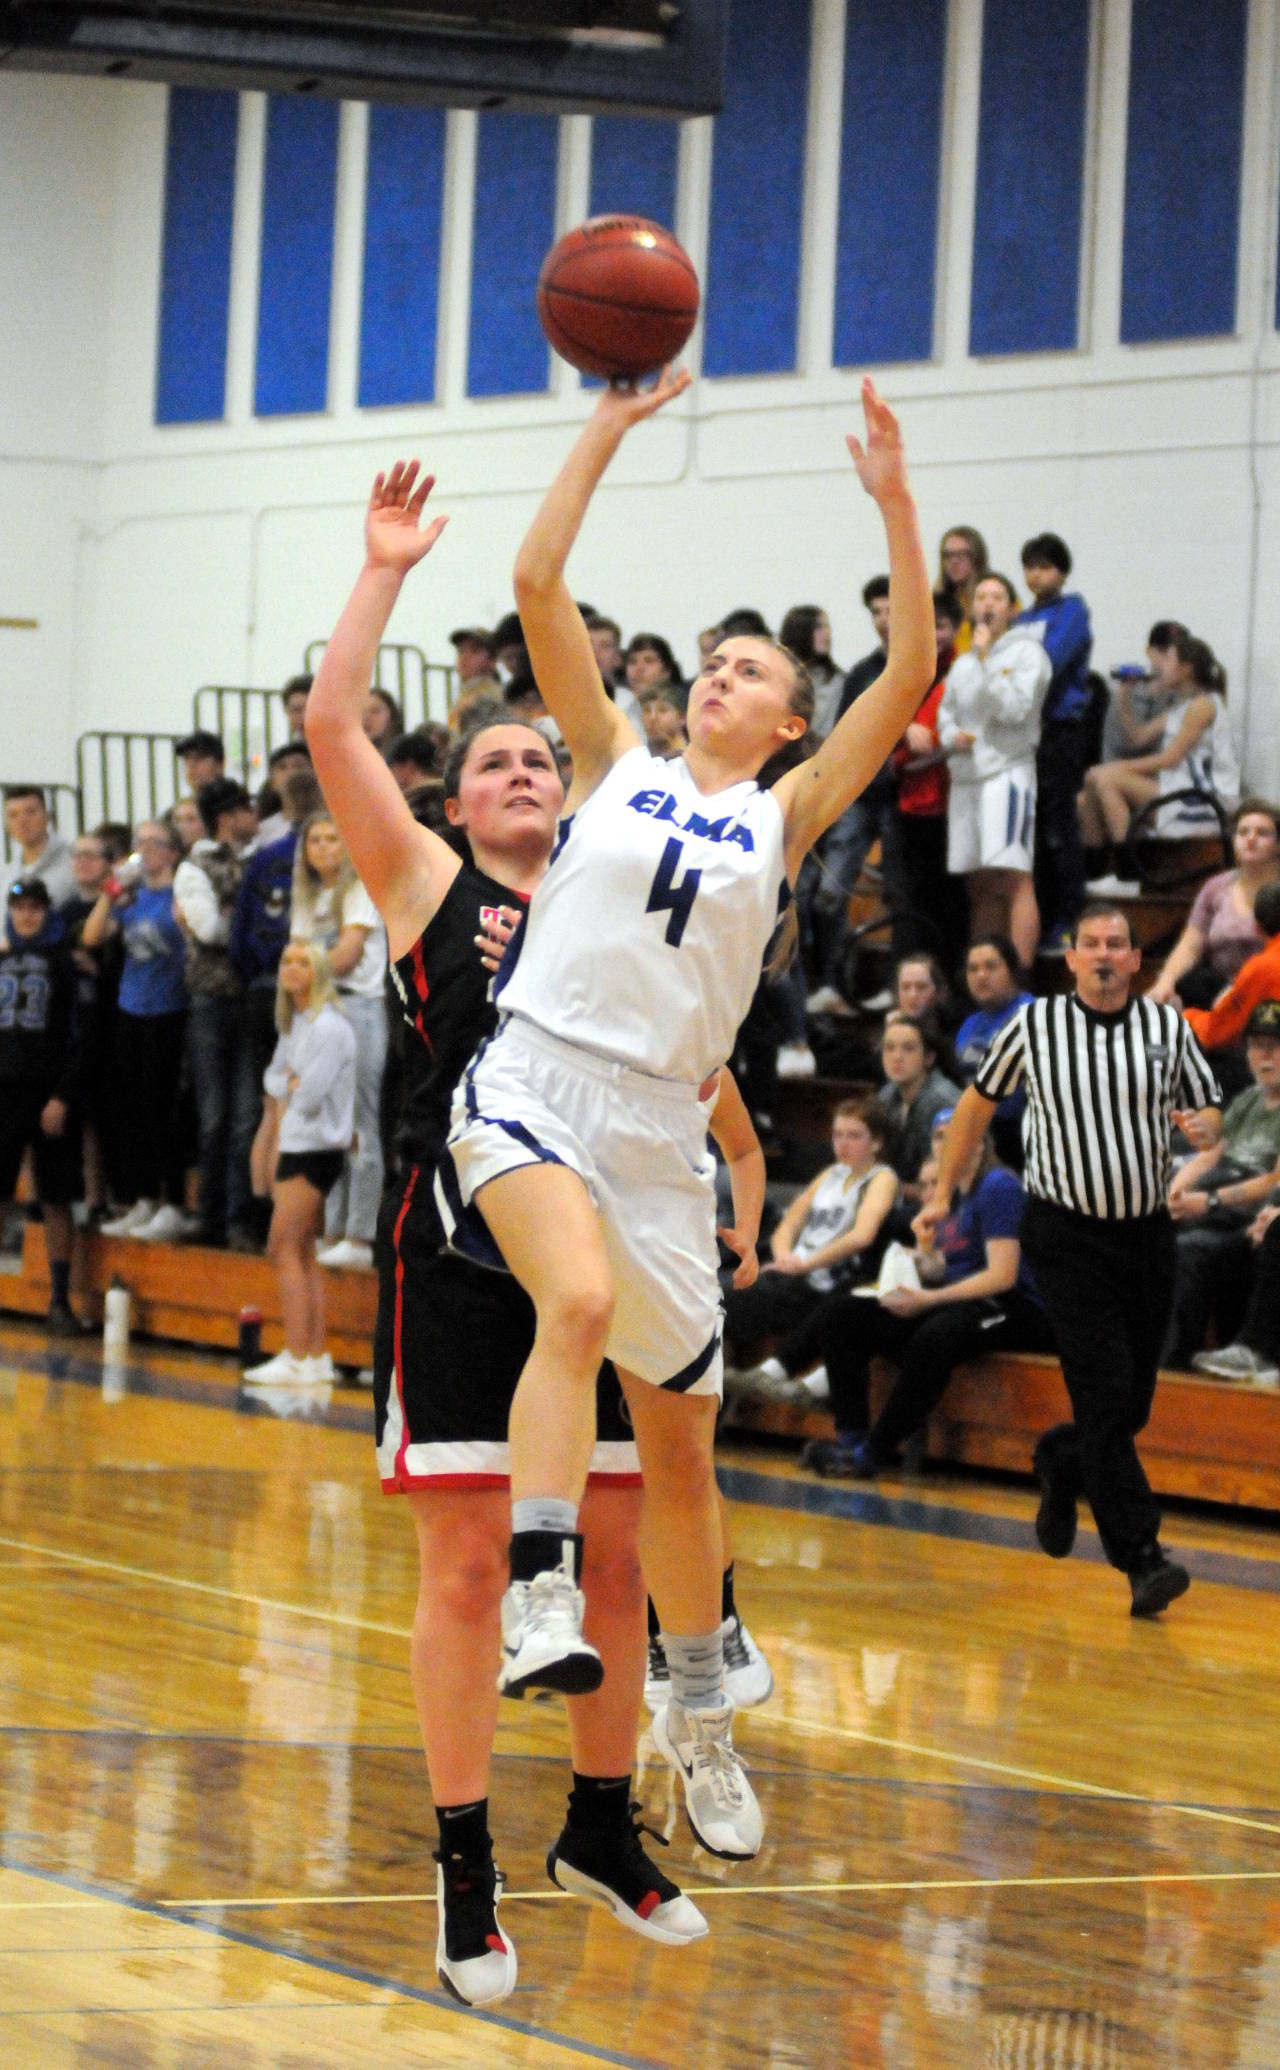 Elma’s Jillian Bieker (4) drives to the basket while being defended by Toledo’s Kal Schaplow during Monday’s game at Elma High School. (Ryan Sparks | Grays Harbor News Group)